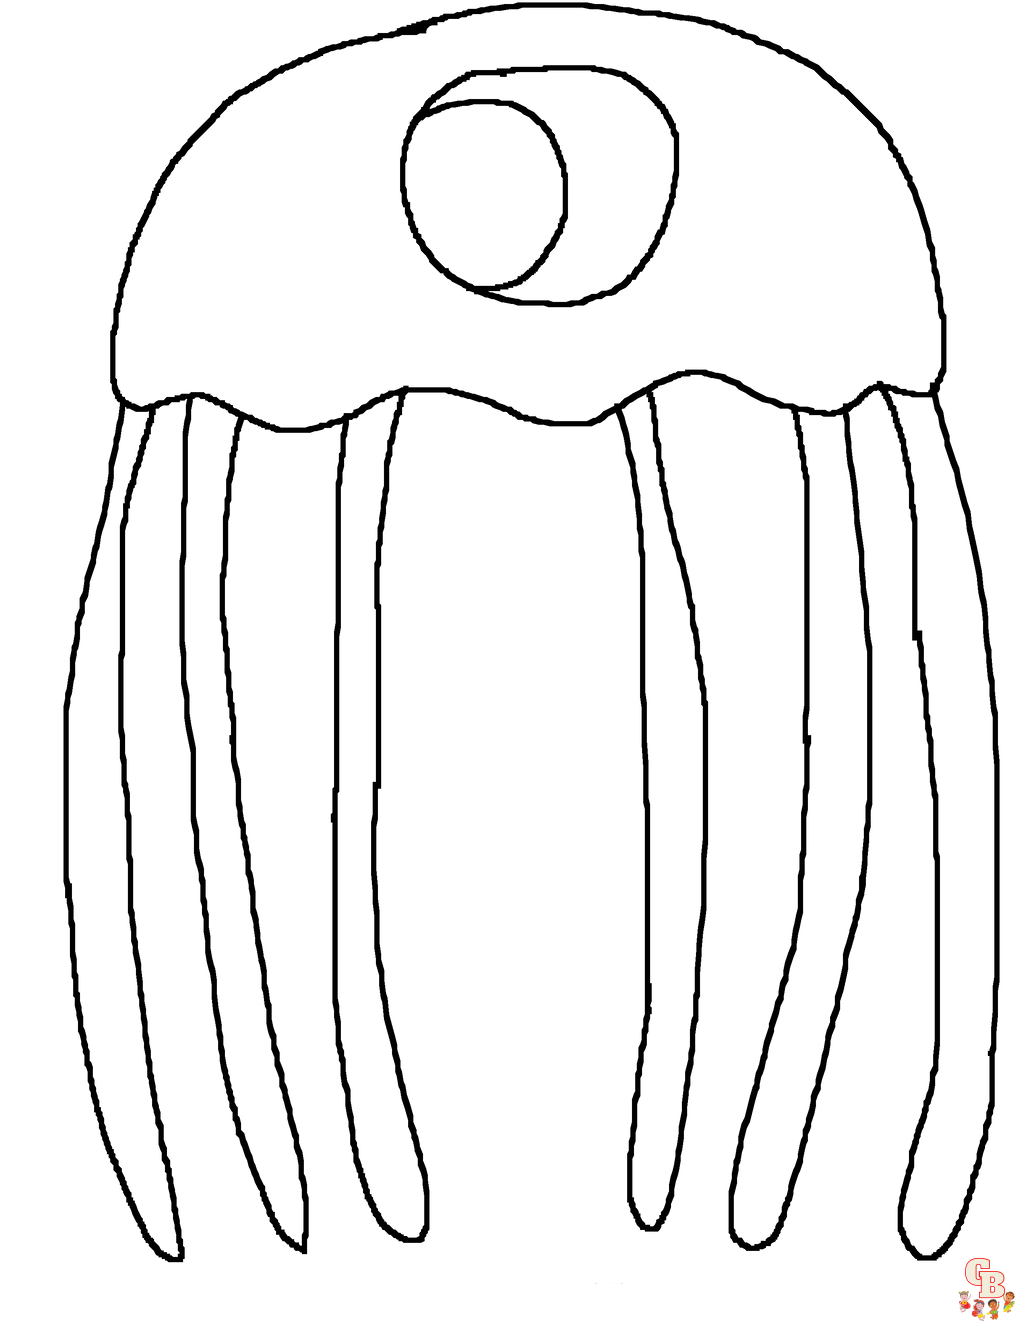 Garden of Banban Coloring Pages